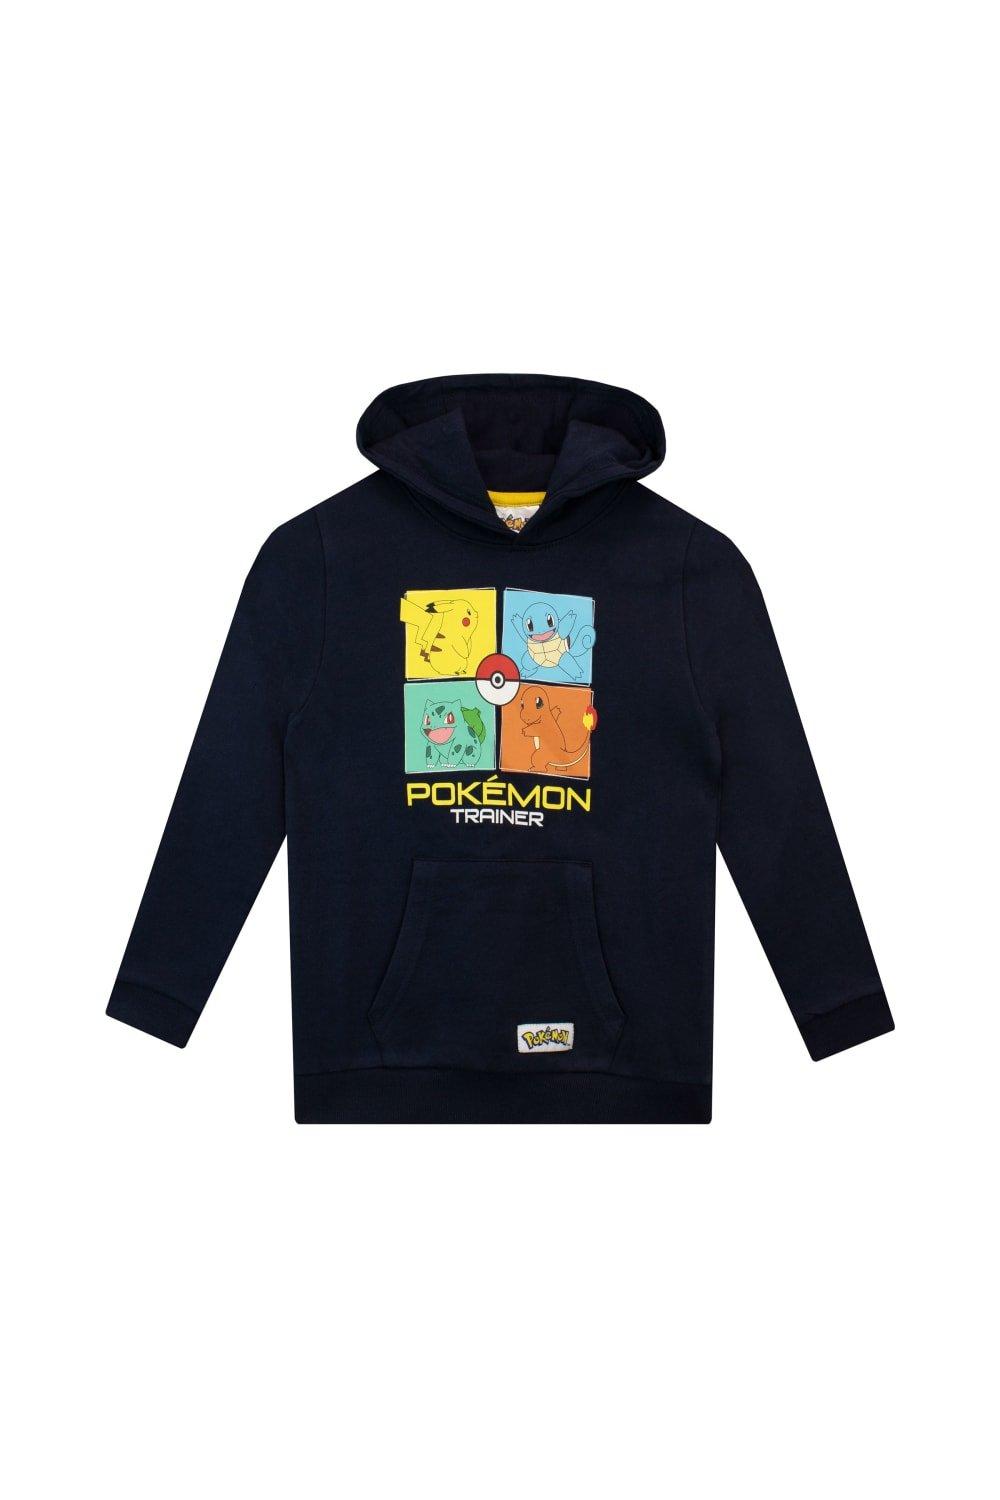 Pikachu Bulbasur Charmander and Squirtle Trainer Hoodie